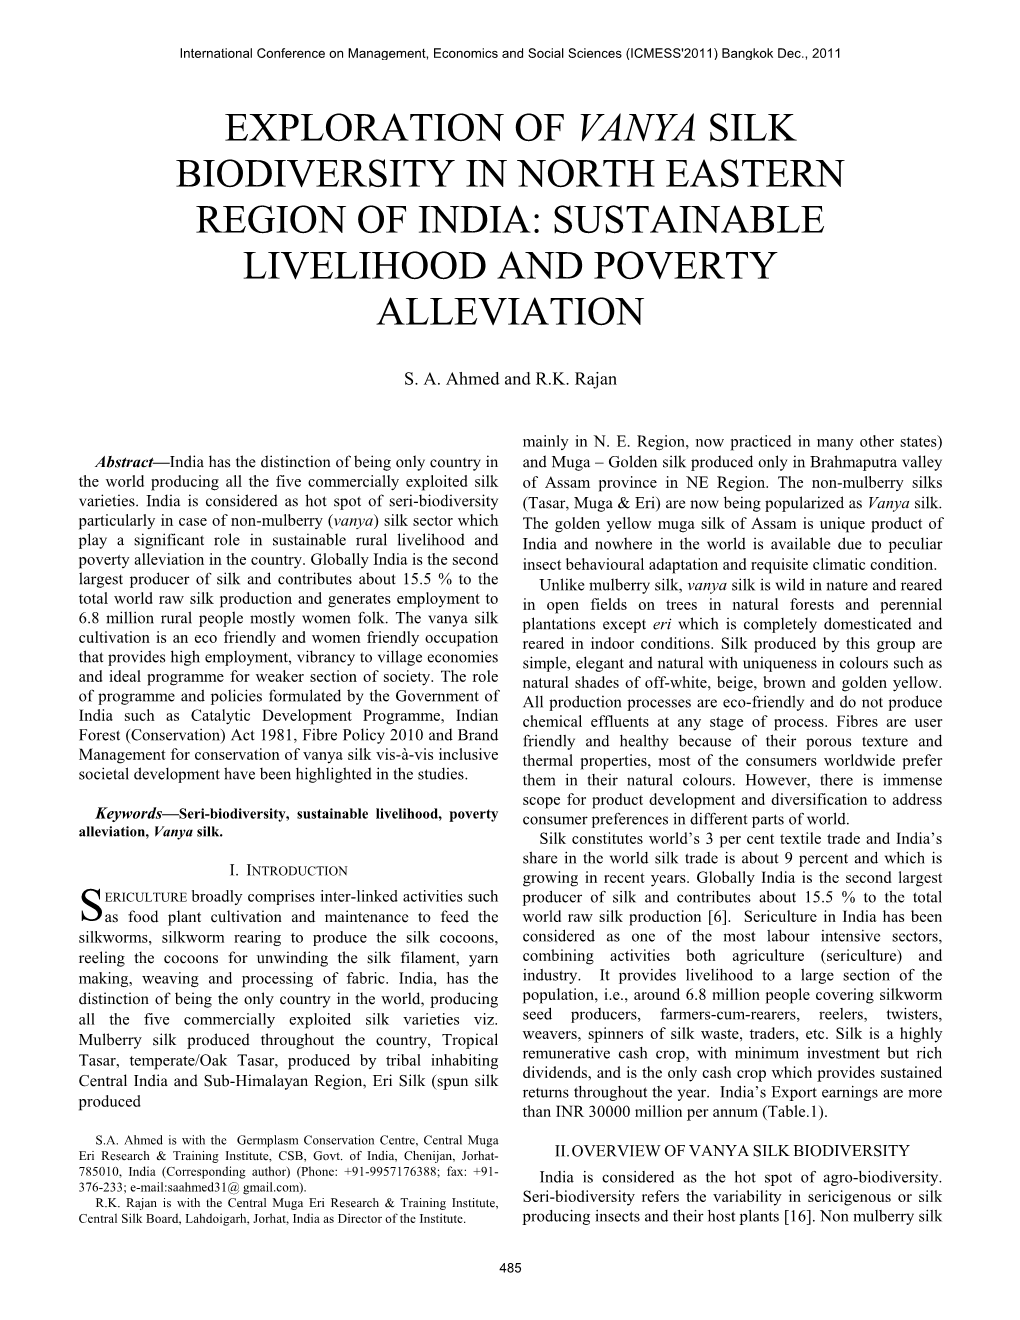 Exploration of Vanya Silk Biodiversity in North Eastern Region of India: Sustainable Livelihood and Poverty Alleviation